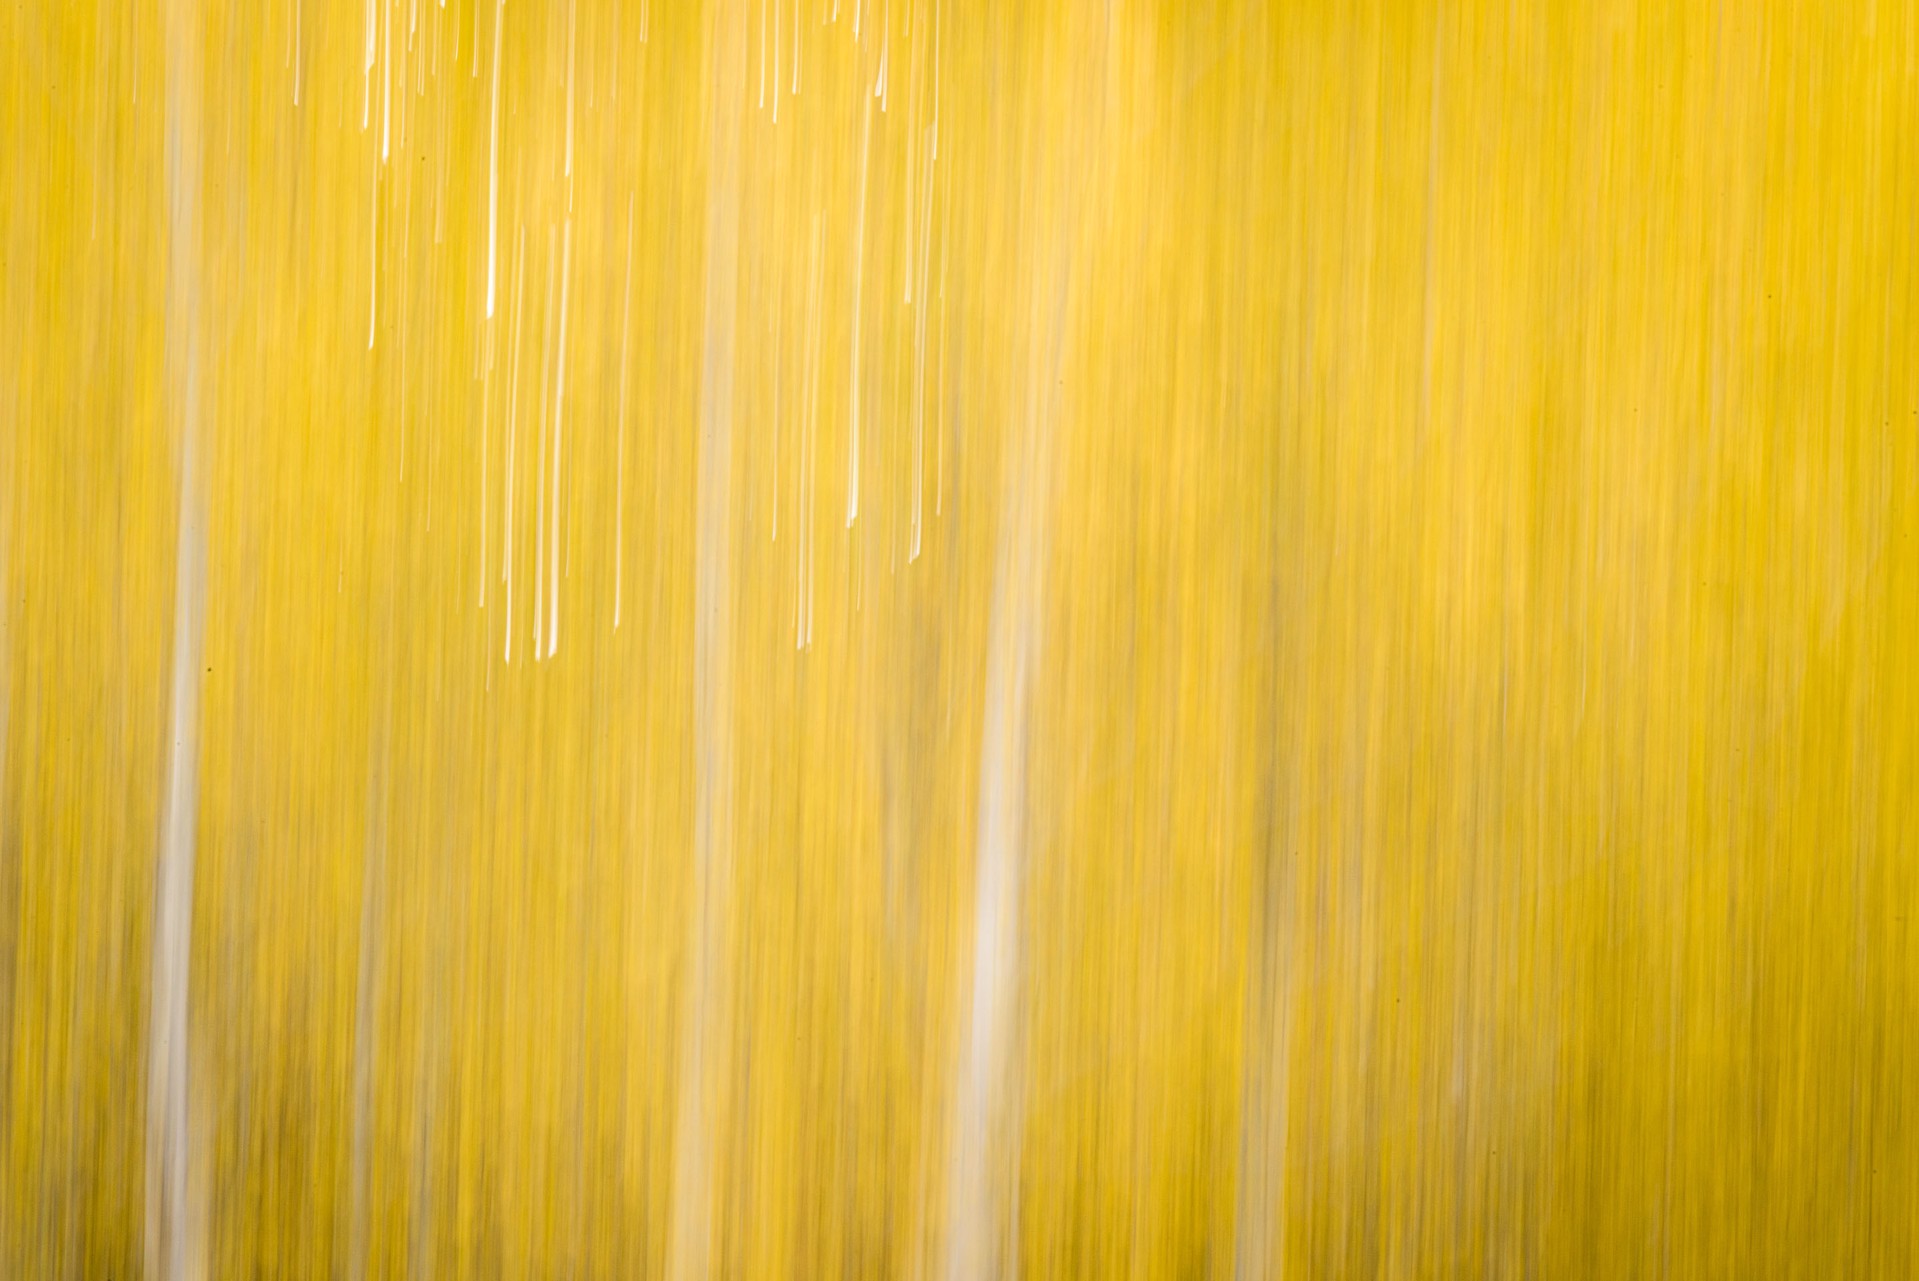 White Streaks Through Bright Yellow Like Falling Stars, Abstract Photography Printed On Metal Of Fall Aspen Trees By Dwight Vasel